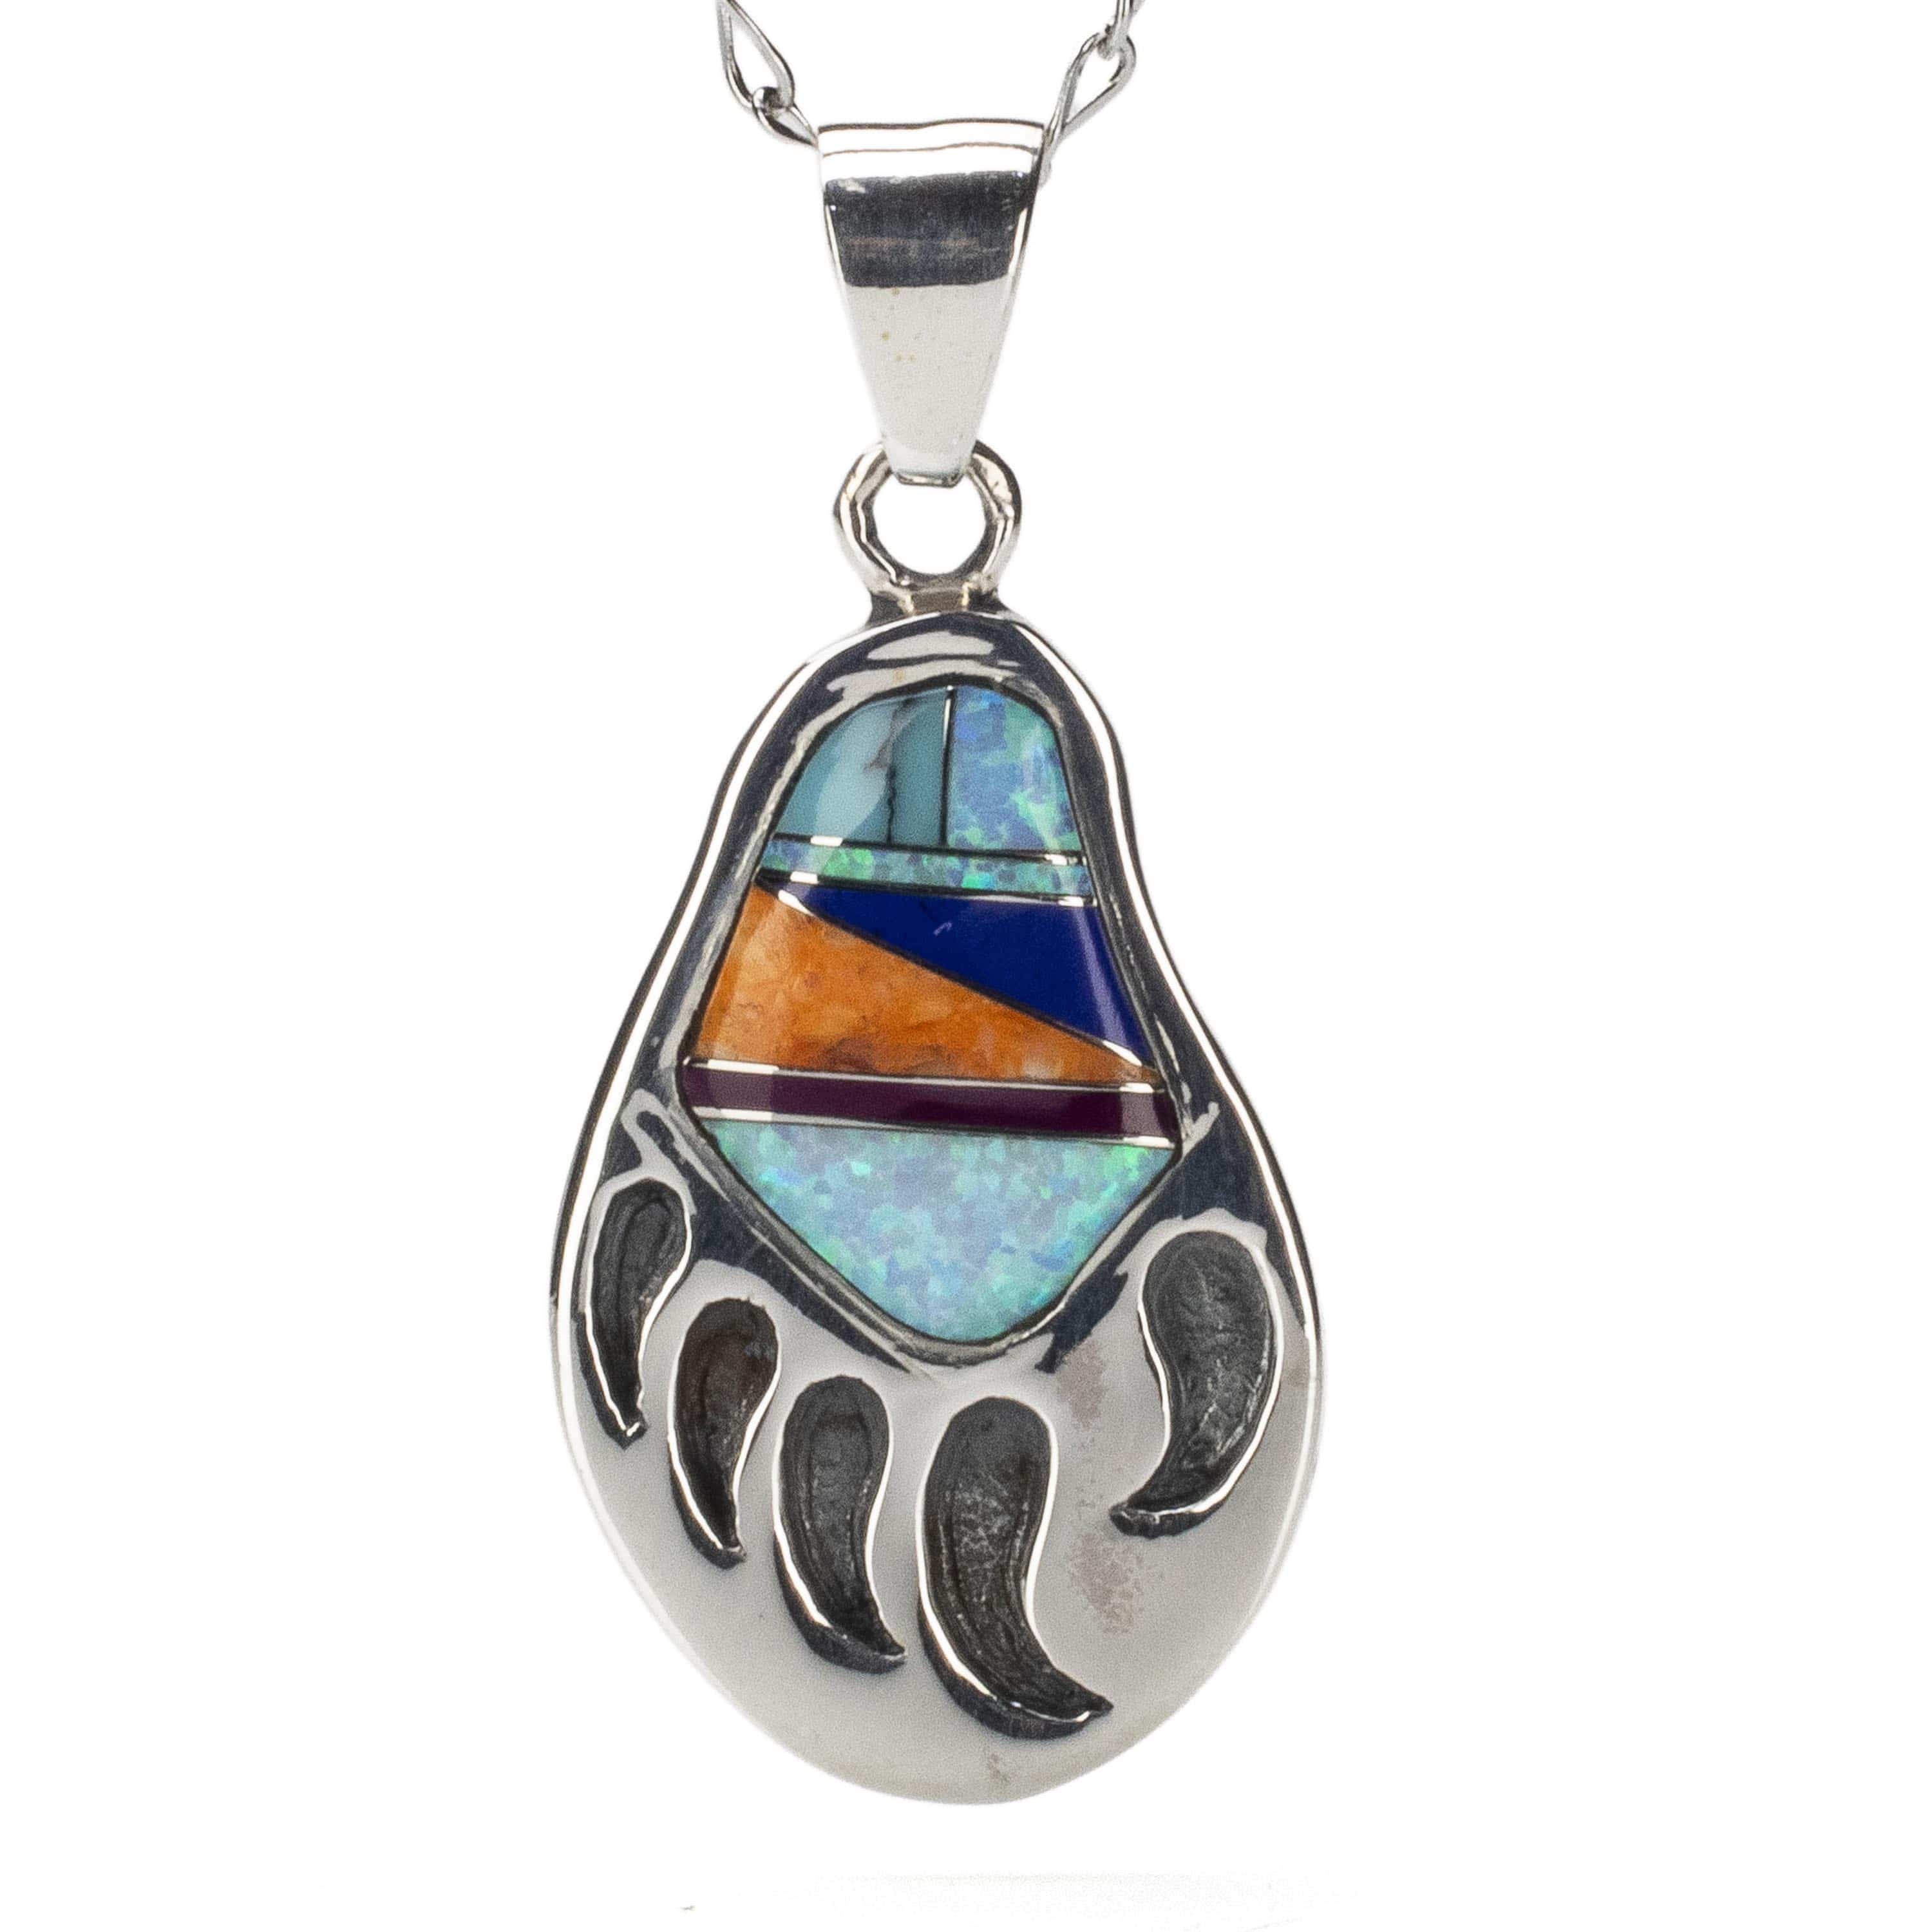 Kalifano Southwest Silver Jewelry Multi Gemstone Bear Claw Handmade with Sterling Silver Pendant and Opal Accent NMN.2318.MT